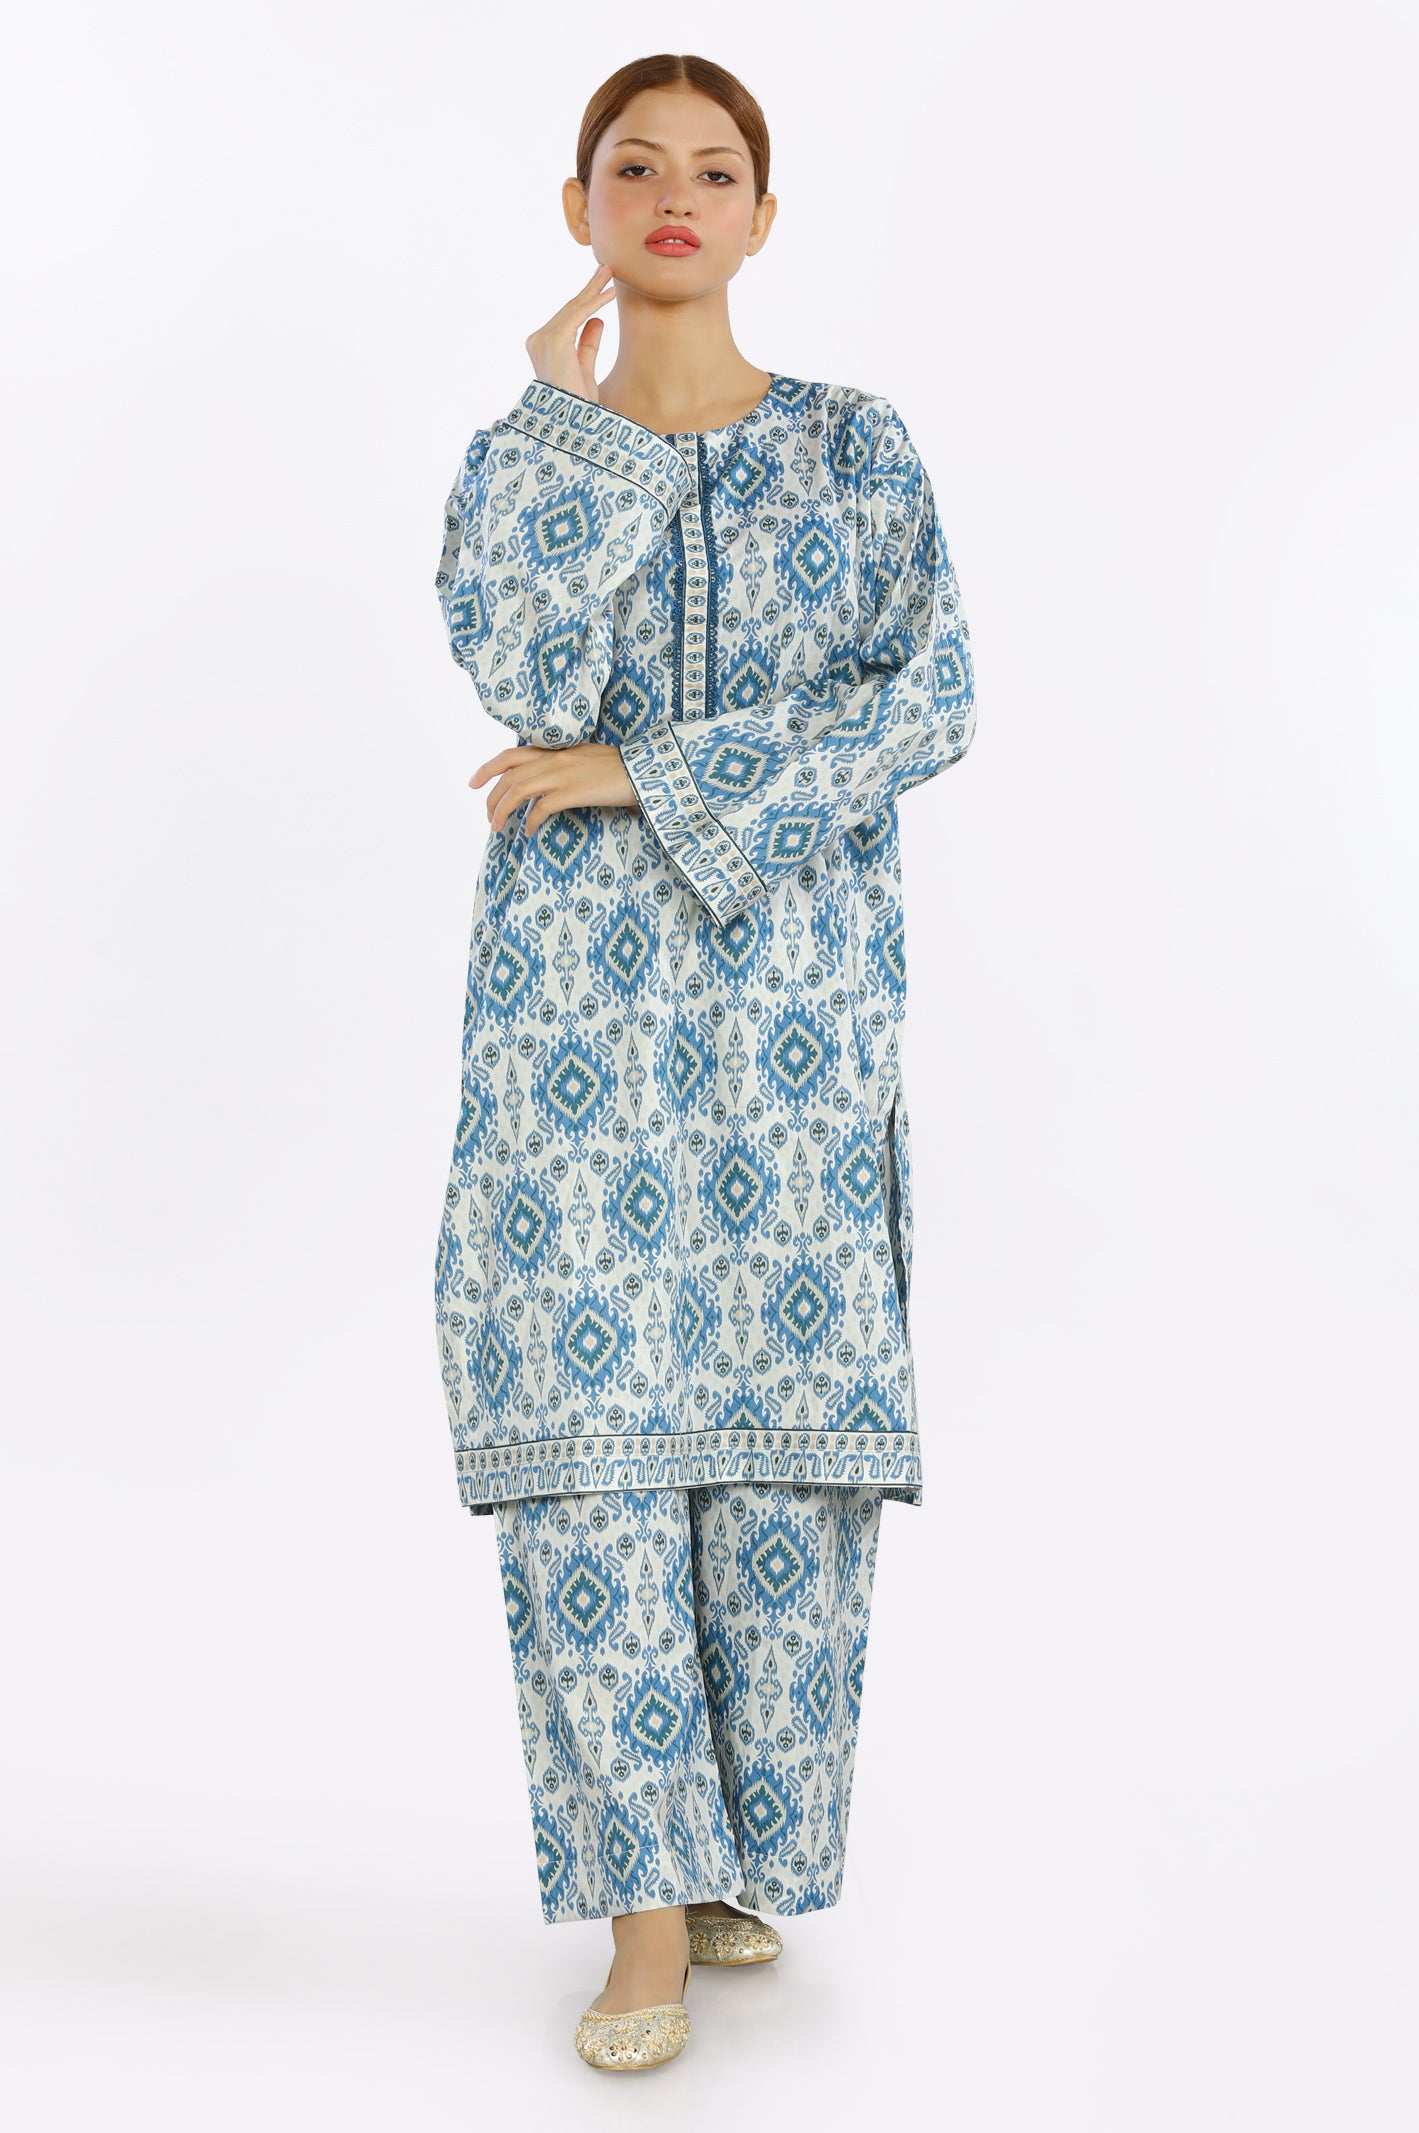 2PC Printed Light Blue Suit From Diners